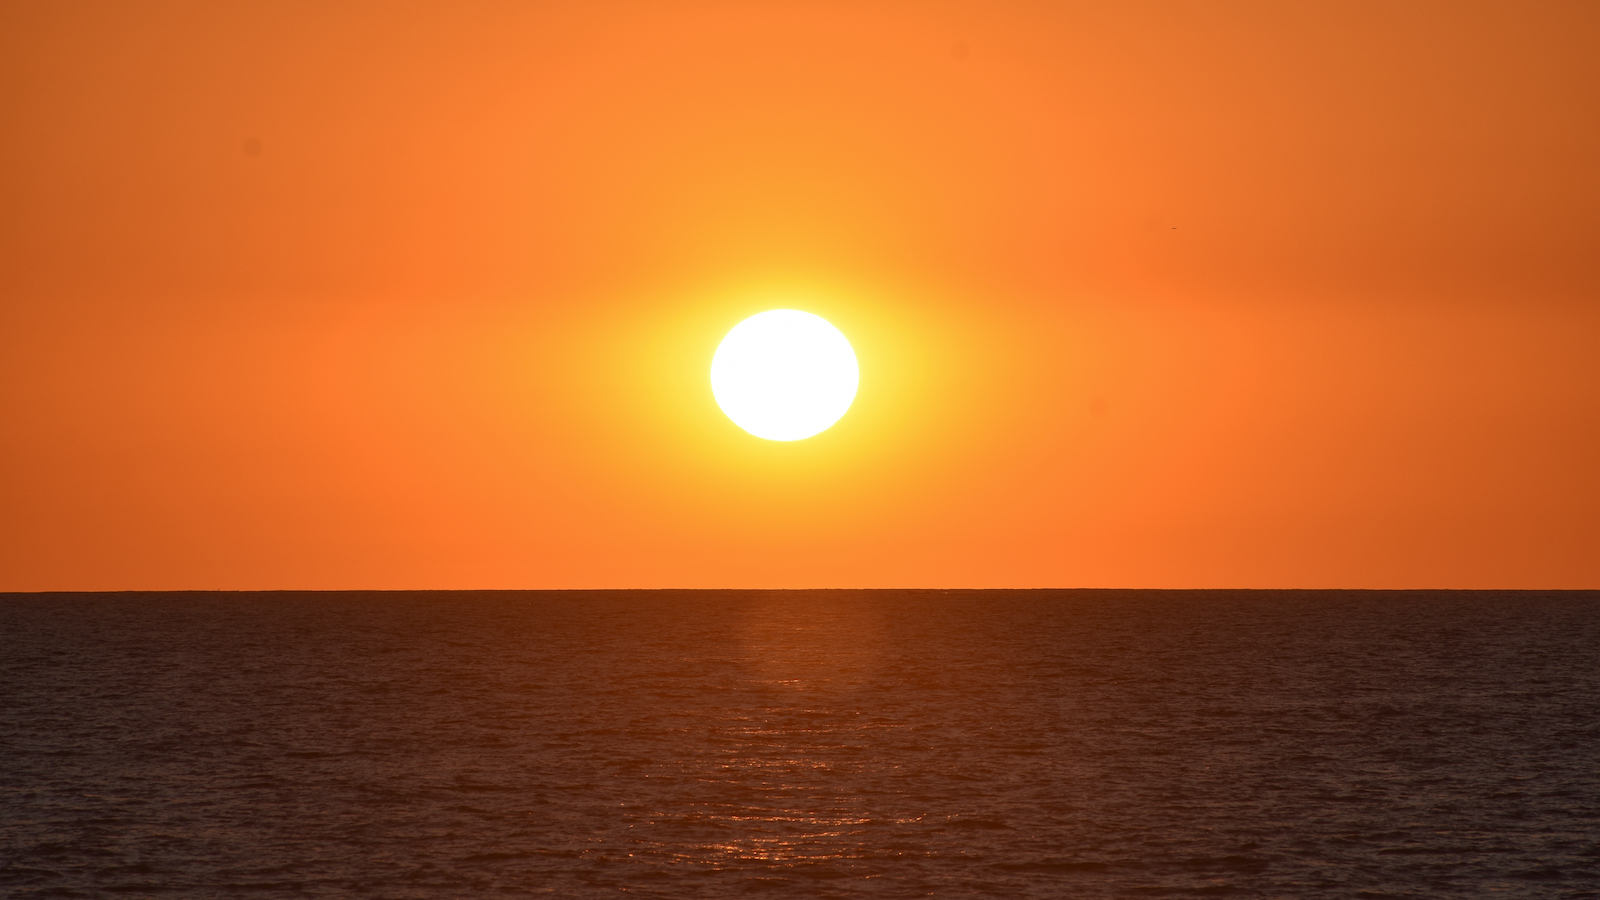 the sun hovers low in the horizon over the ocean. The sky is orange.